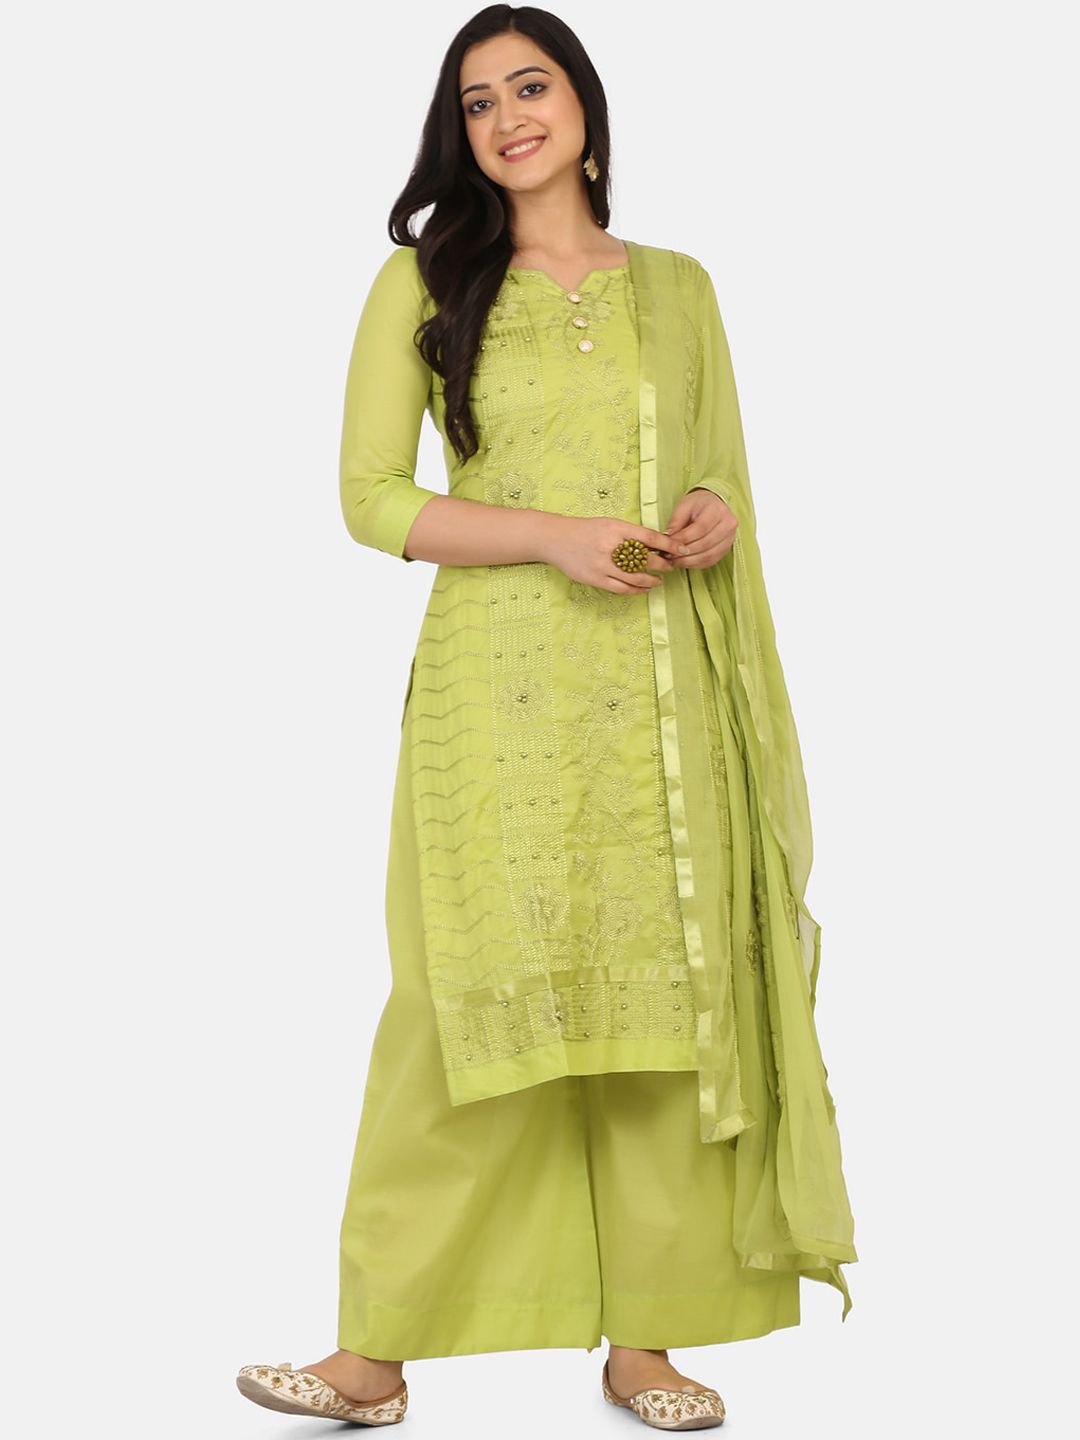 Shaily Green Cotton Blend Unstitched Dress Material Price in India